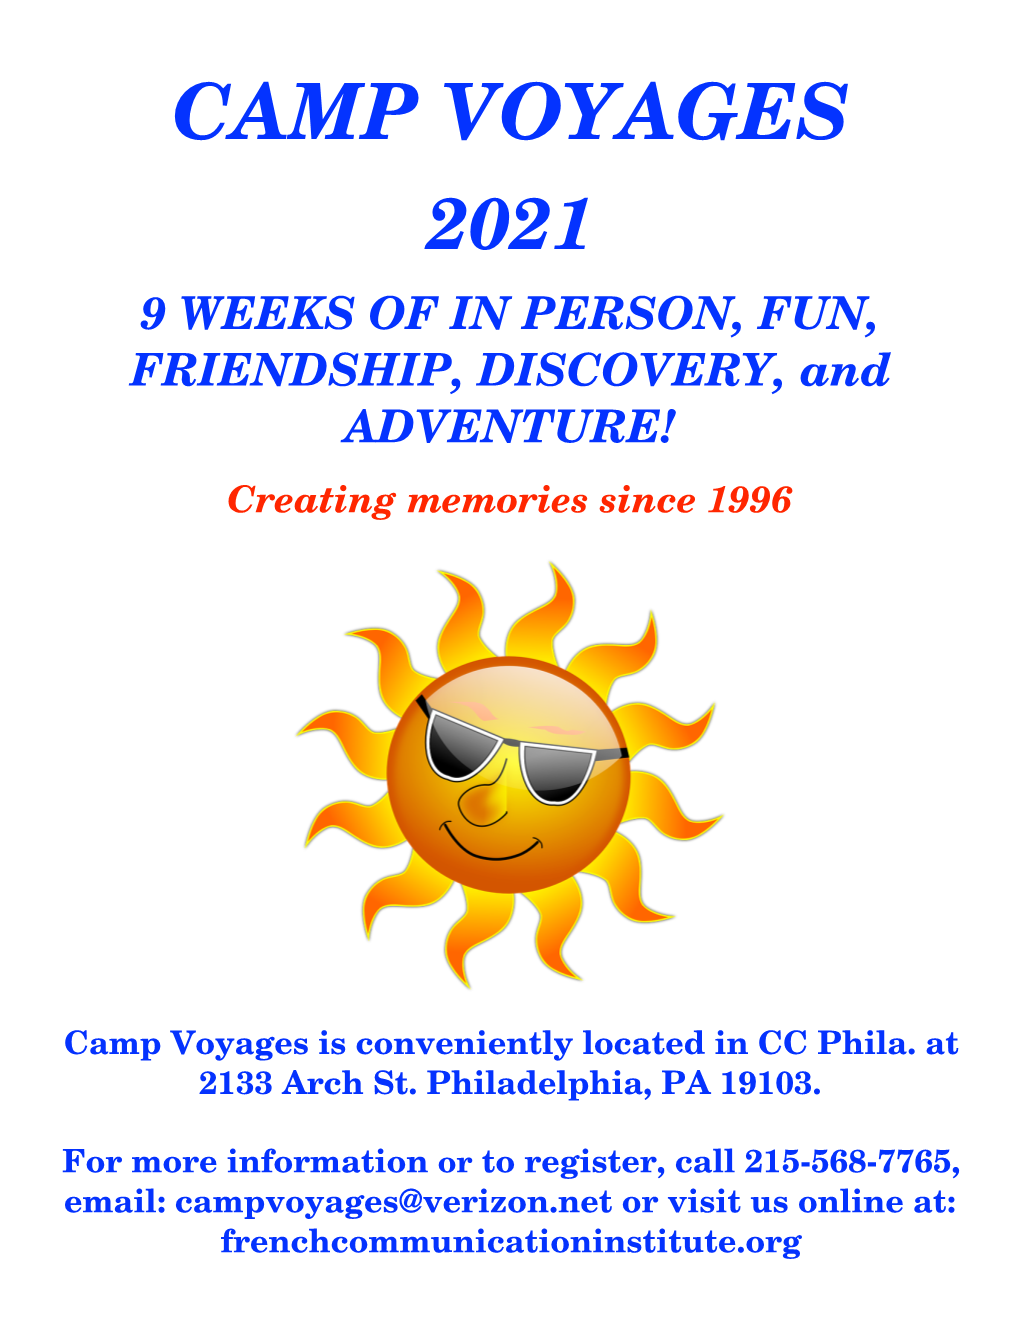 CAMP VOYAGES 2021 9 WEEKS of in PERSON, FUN, FRIENDSHIP, DISCOVERY, and ADVENTURE! Creating Memories Since 1996